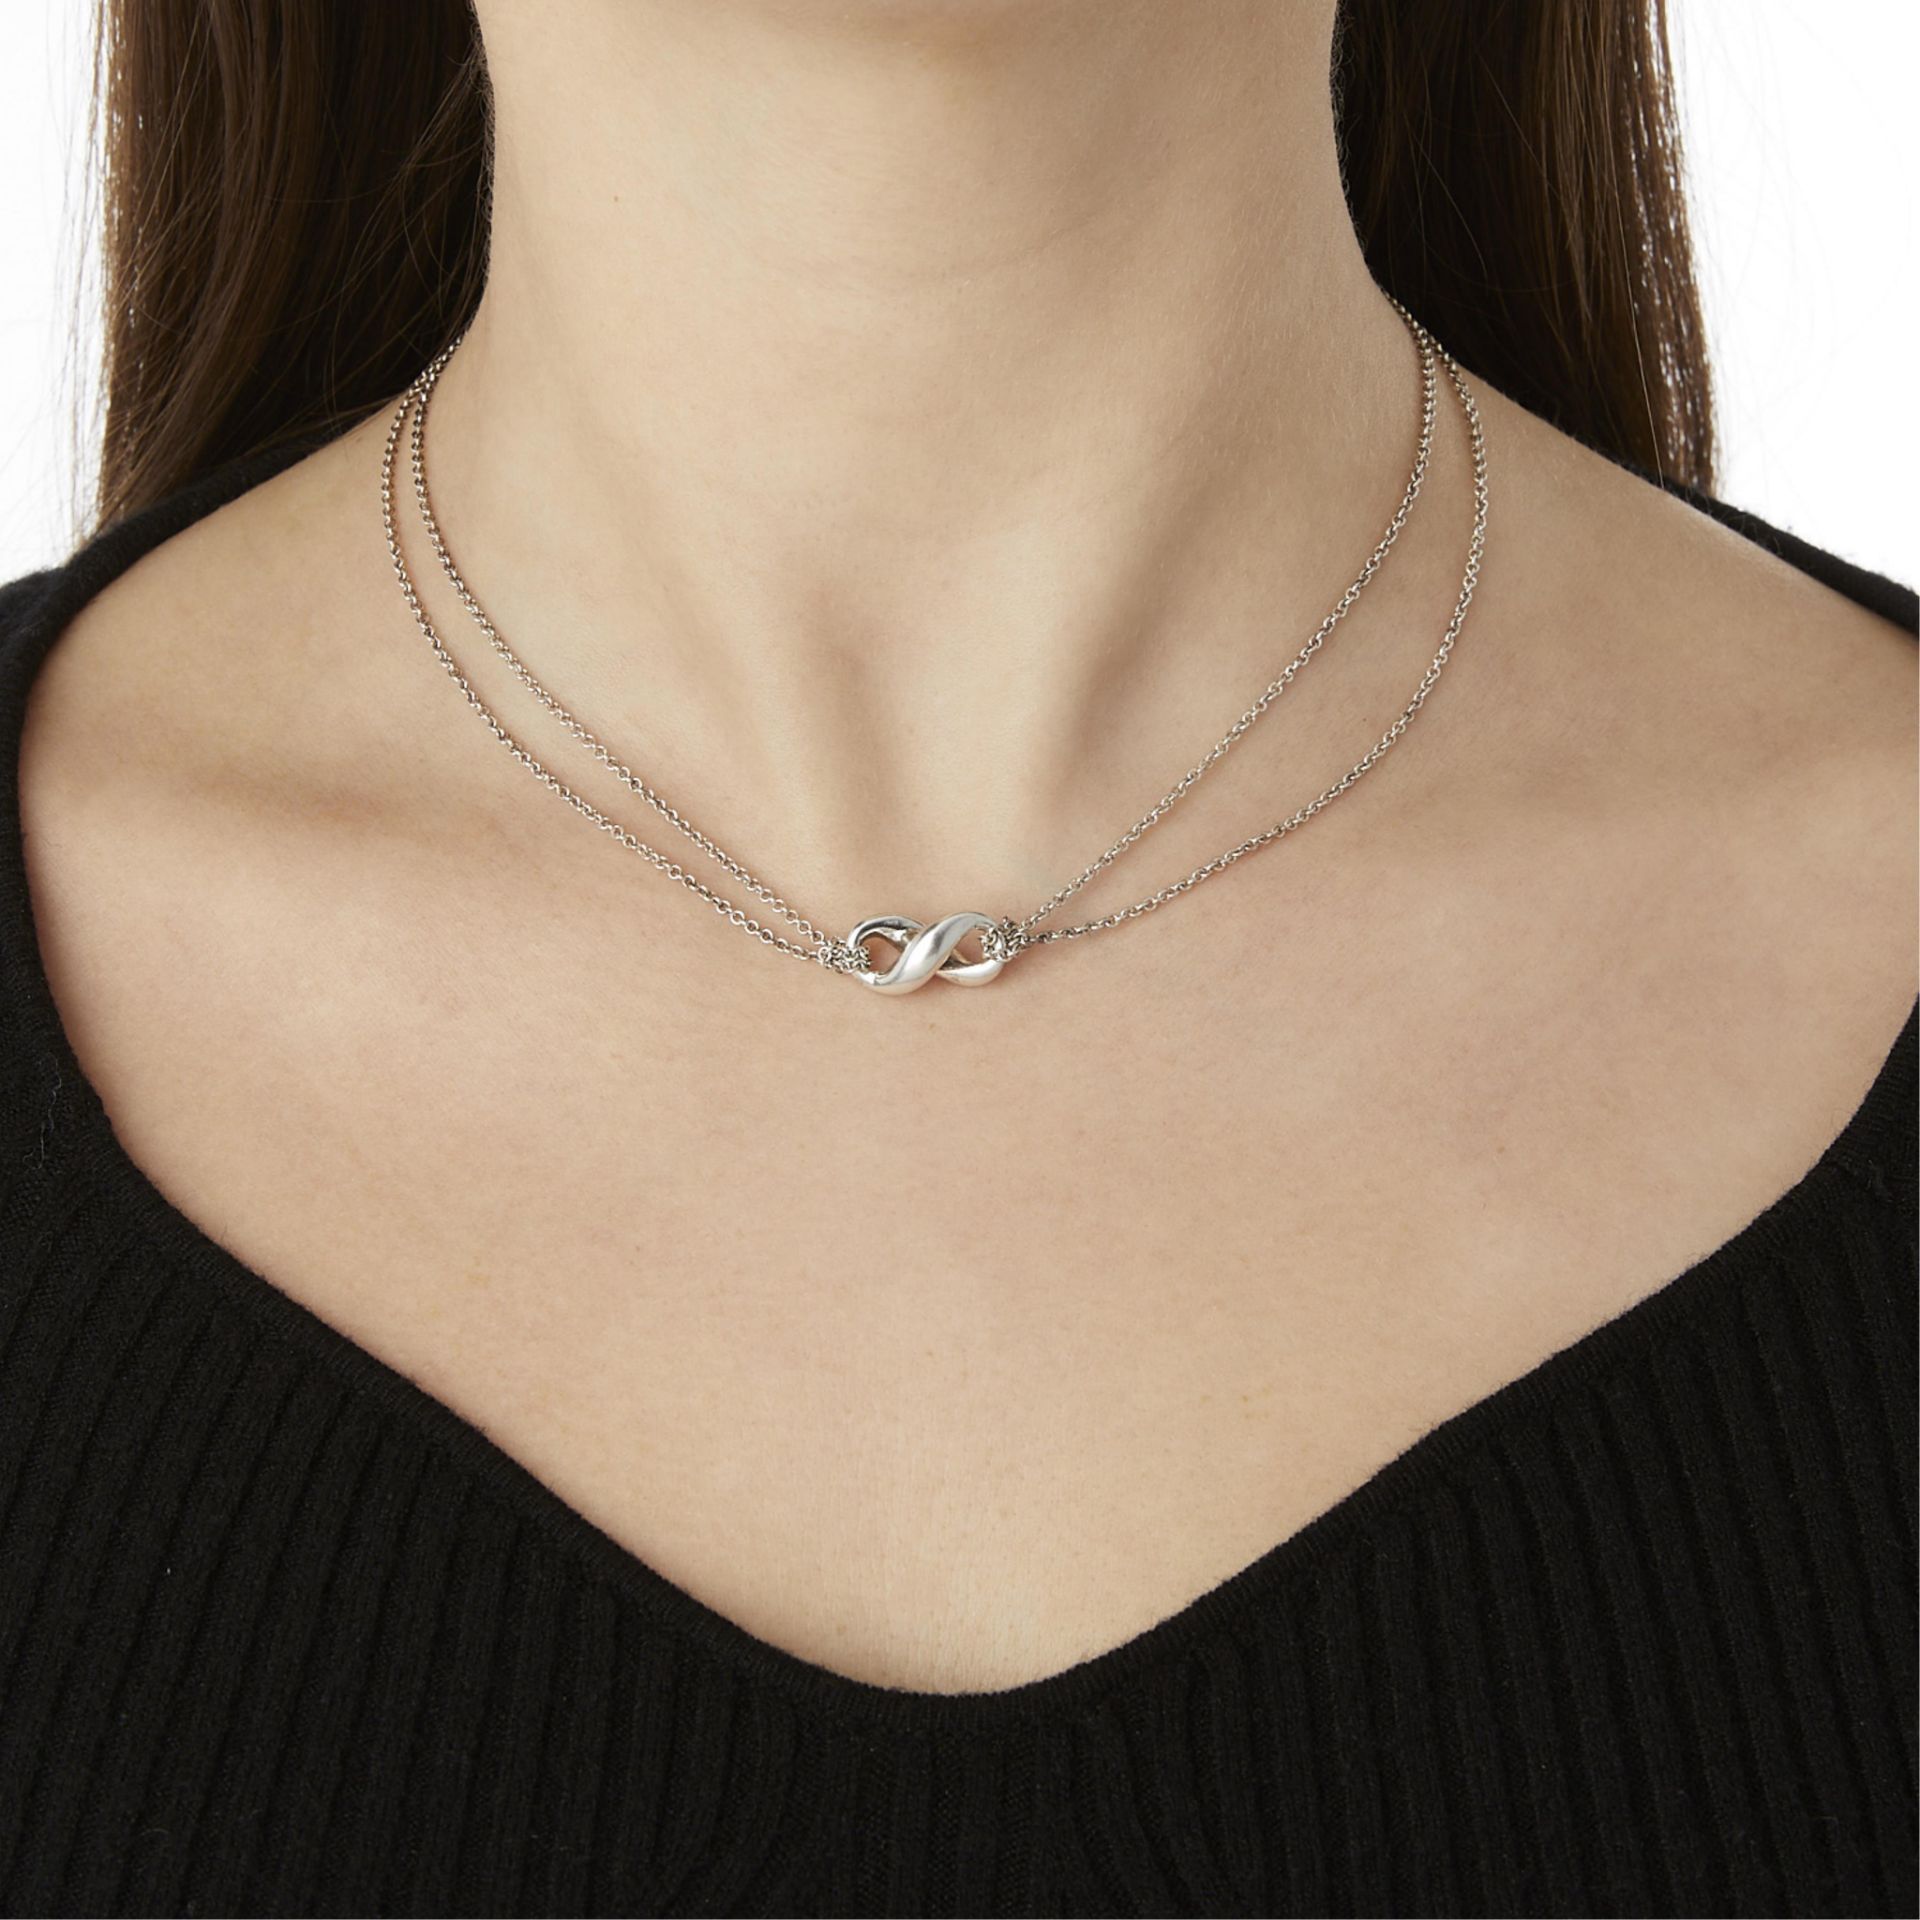 Tiffany & Co. Infinity Necklace - Image 2 of 8